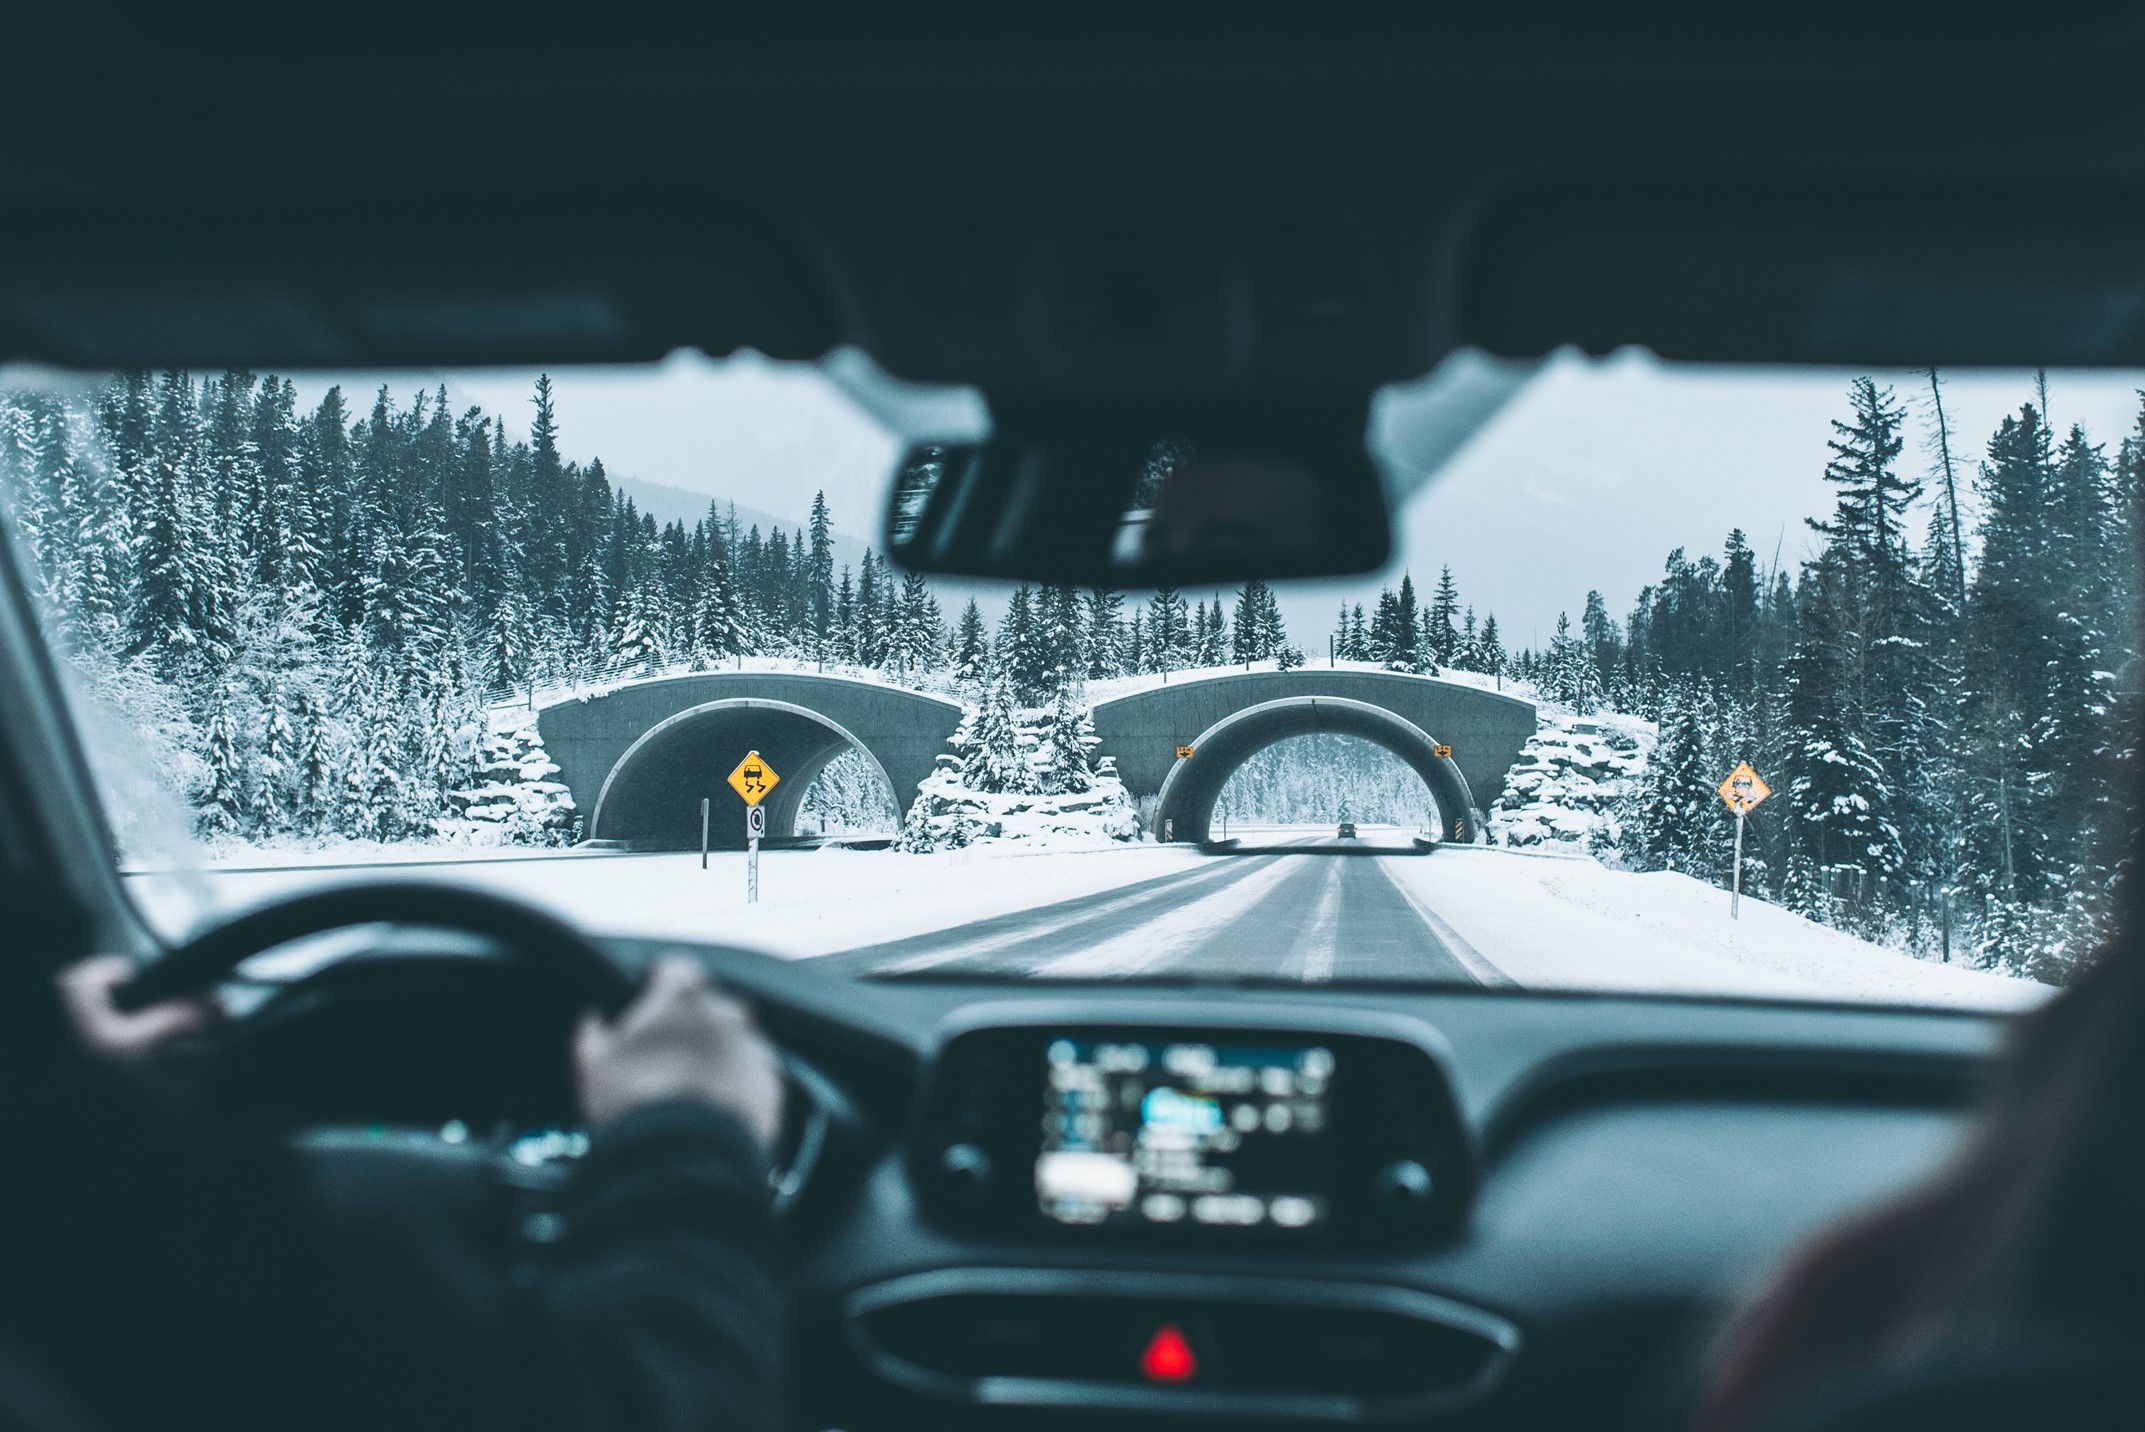 View from inside a car on snow covered roads